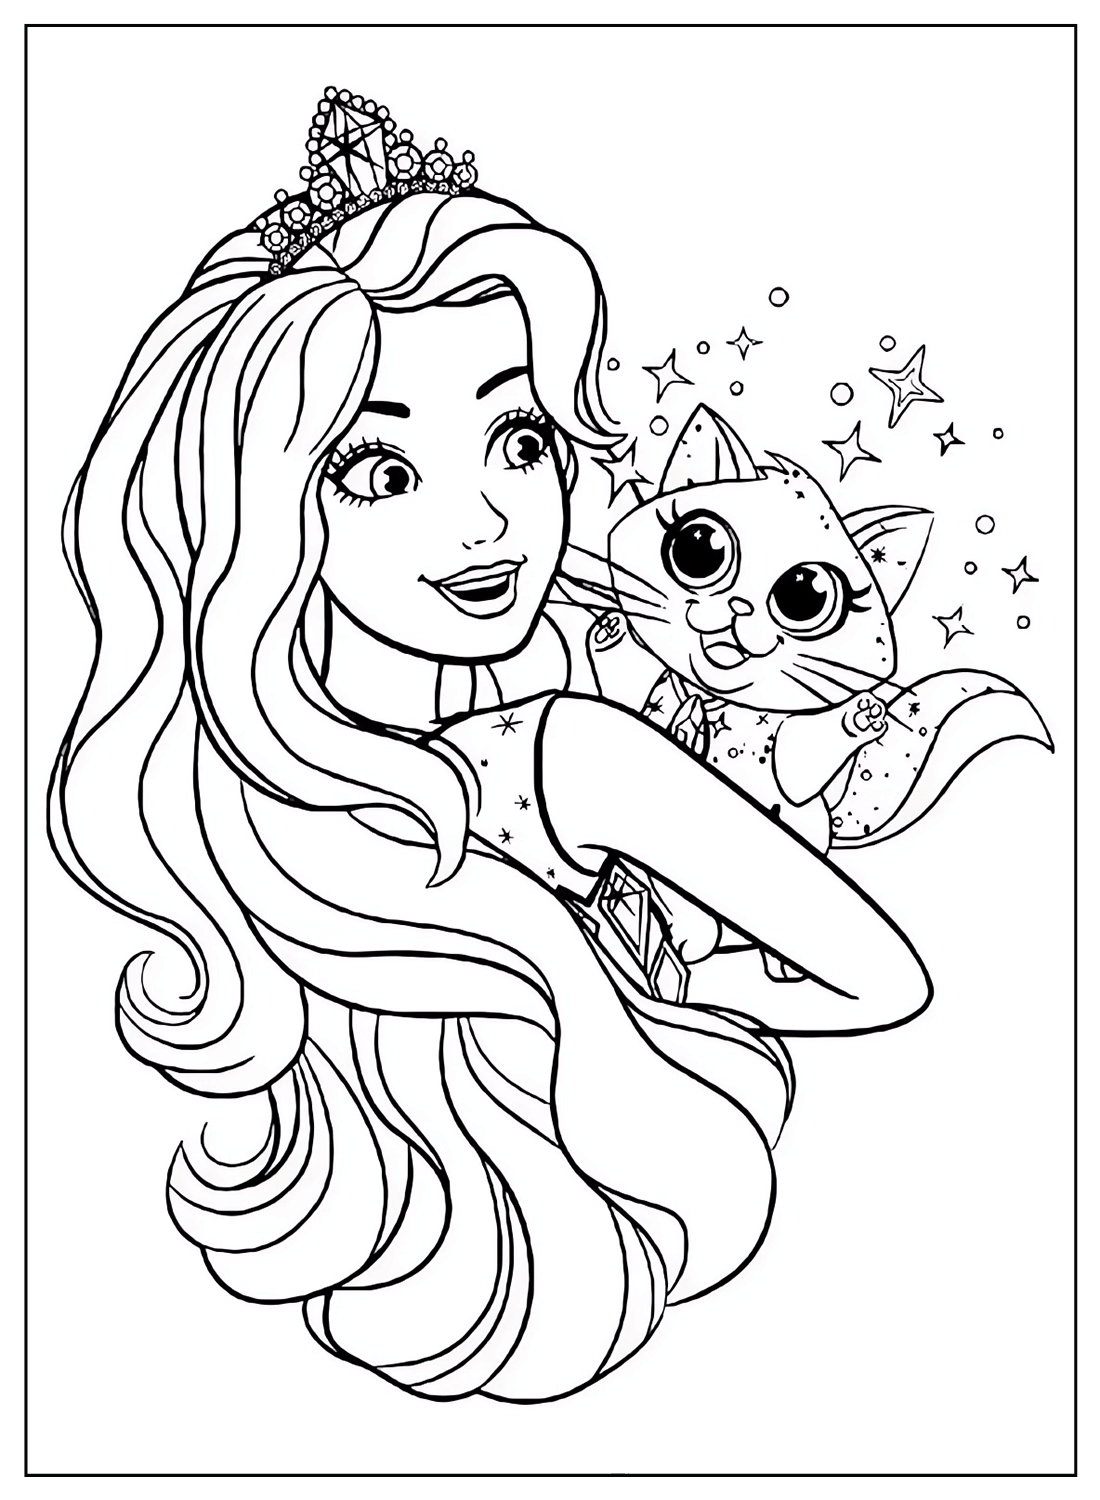 Coloring Sheets Barbie from Barbie